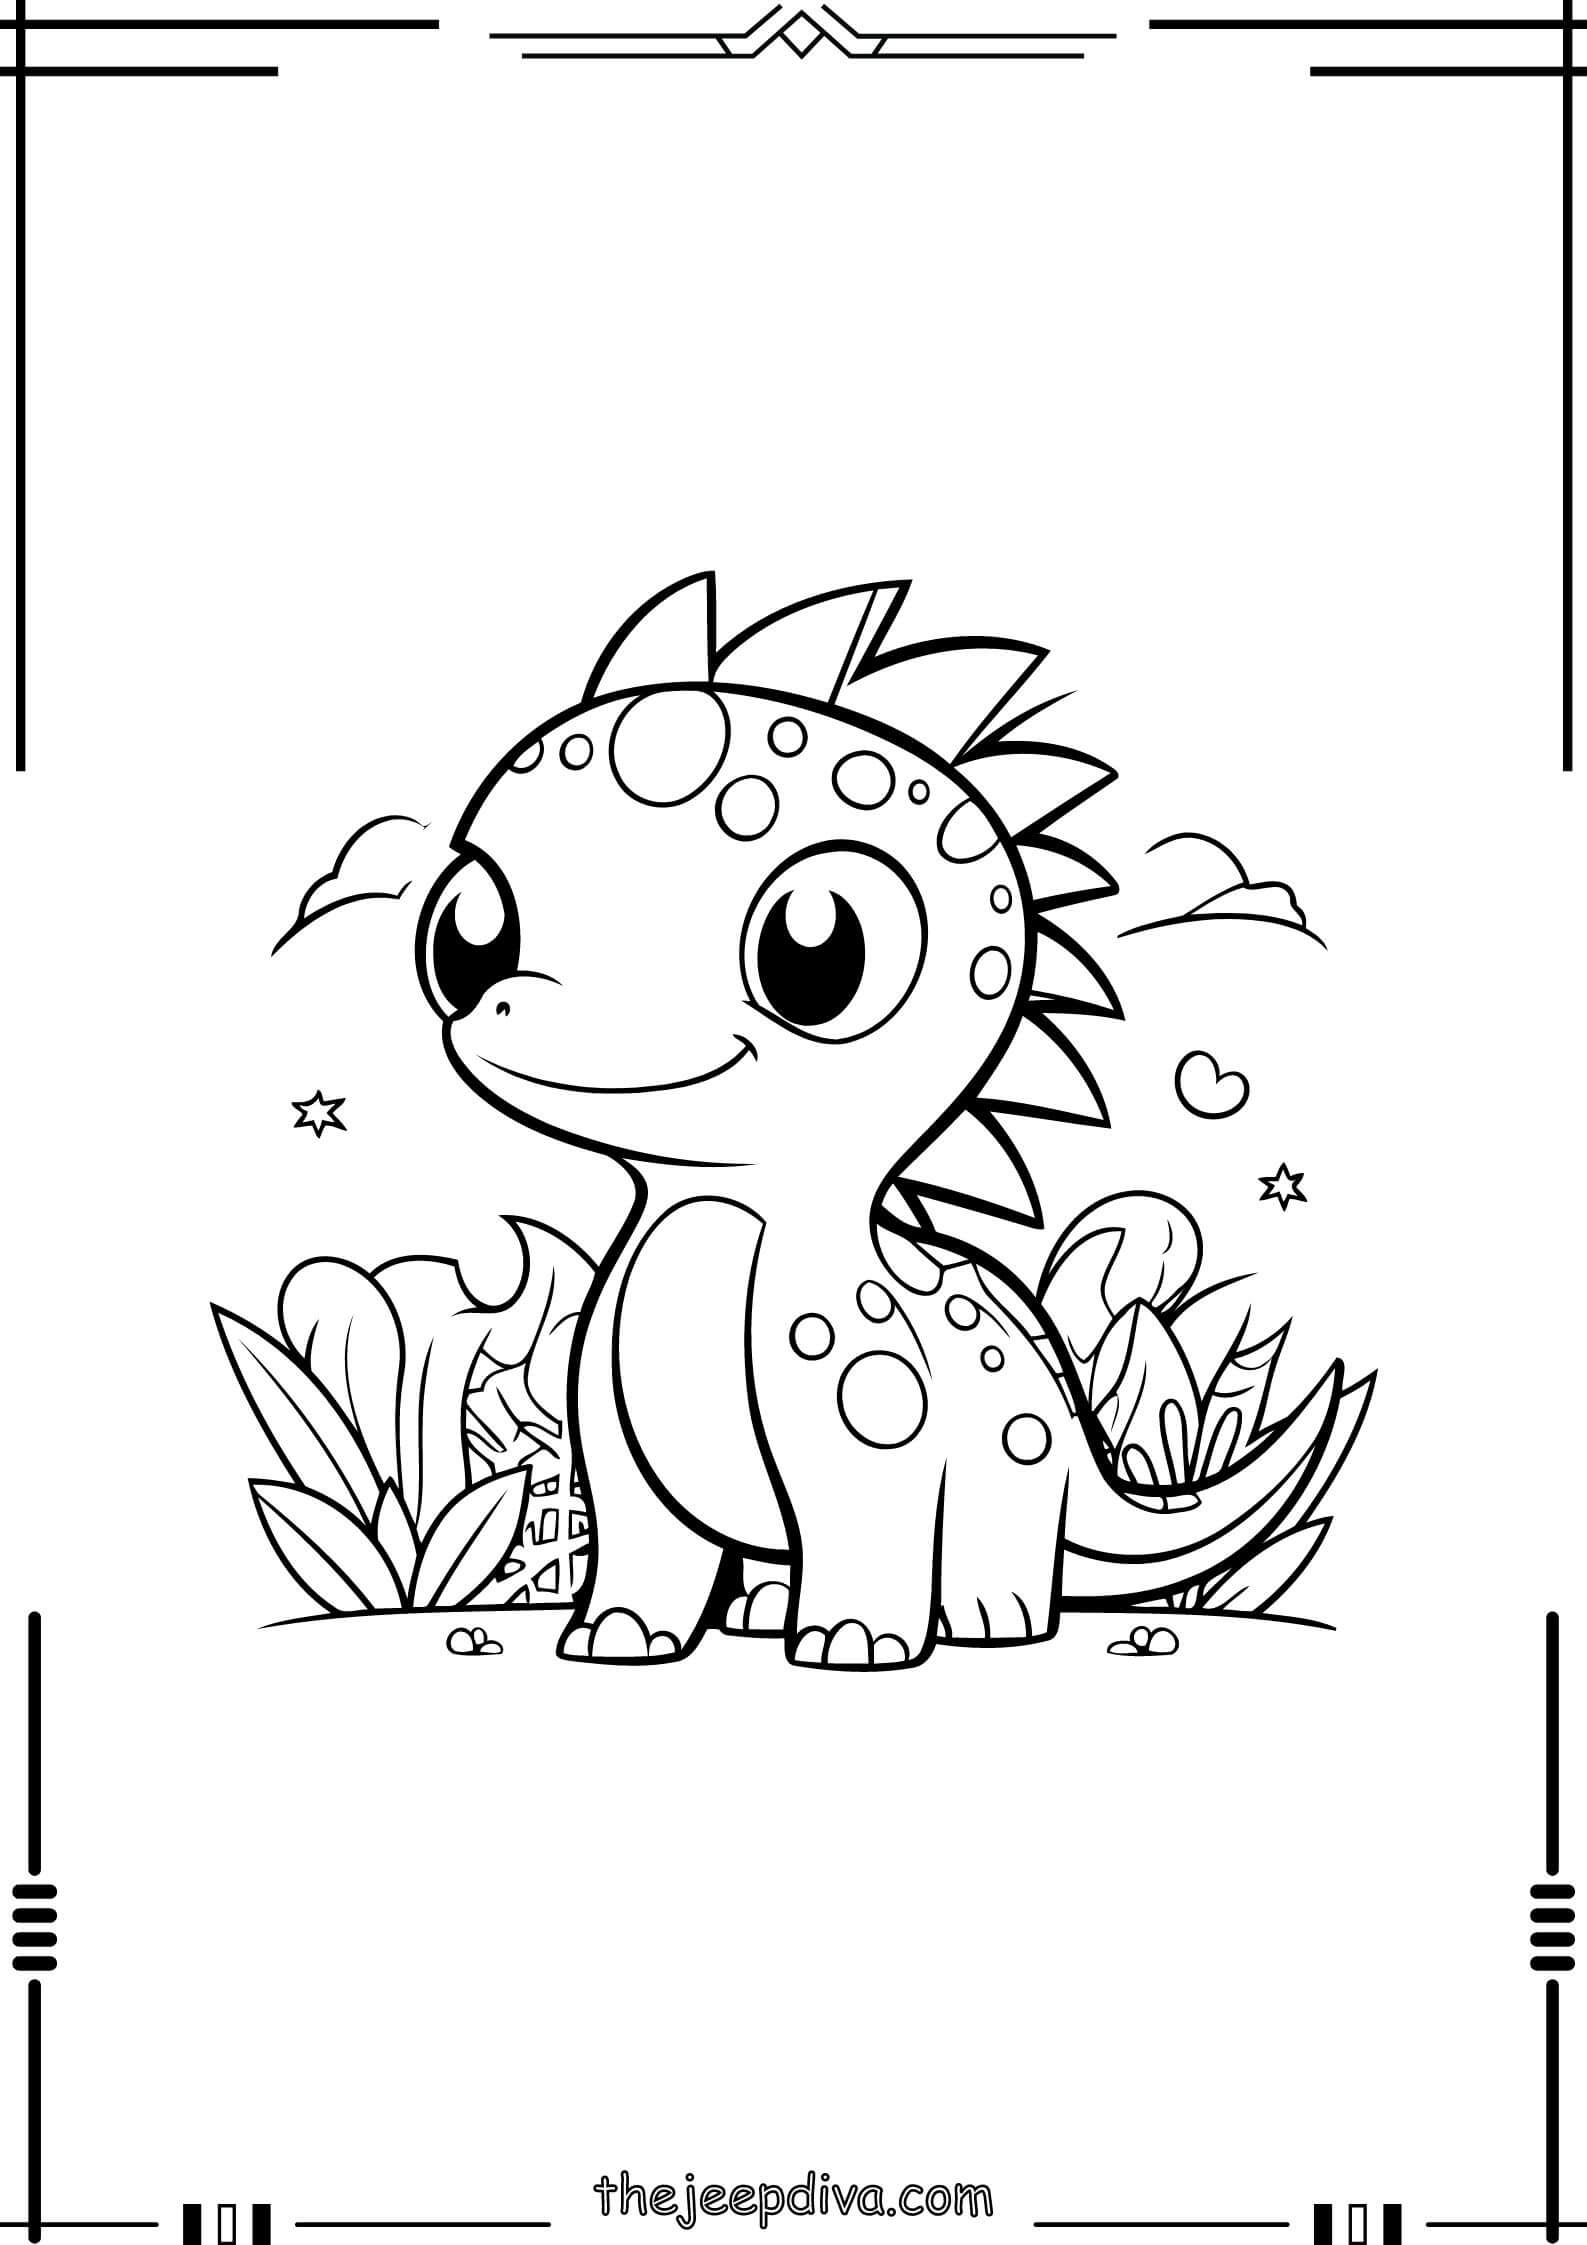 Dinosaur-Colouring-Pages-Easy-14